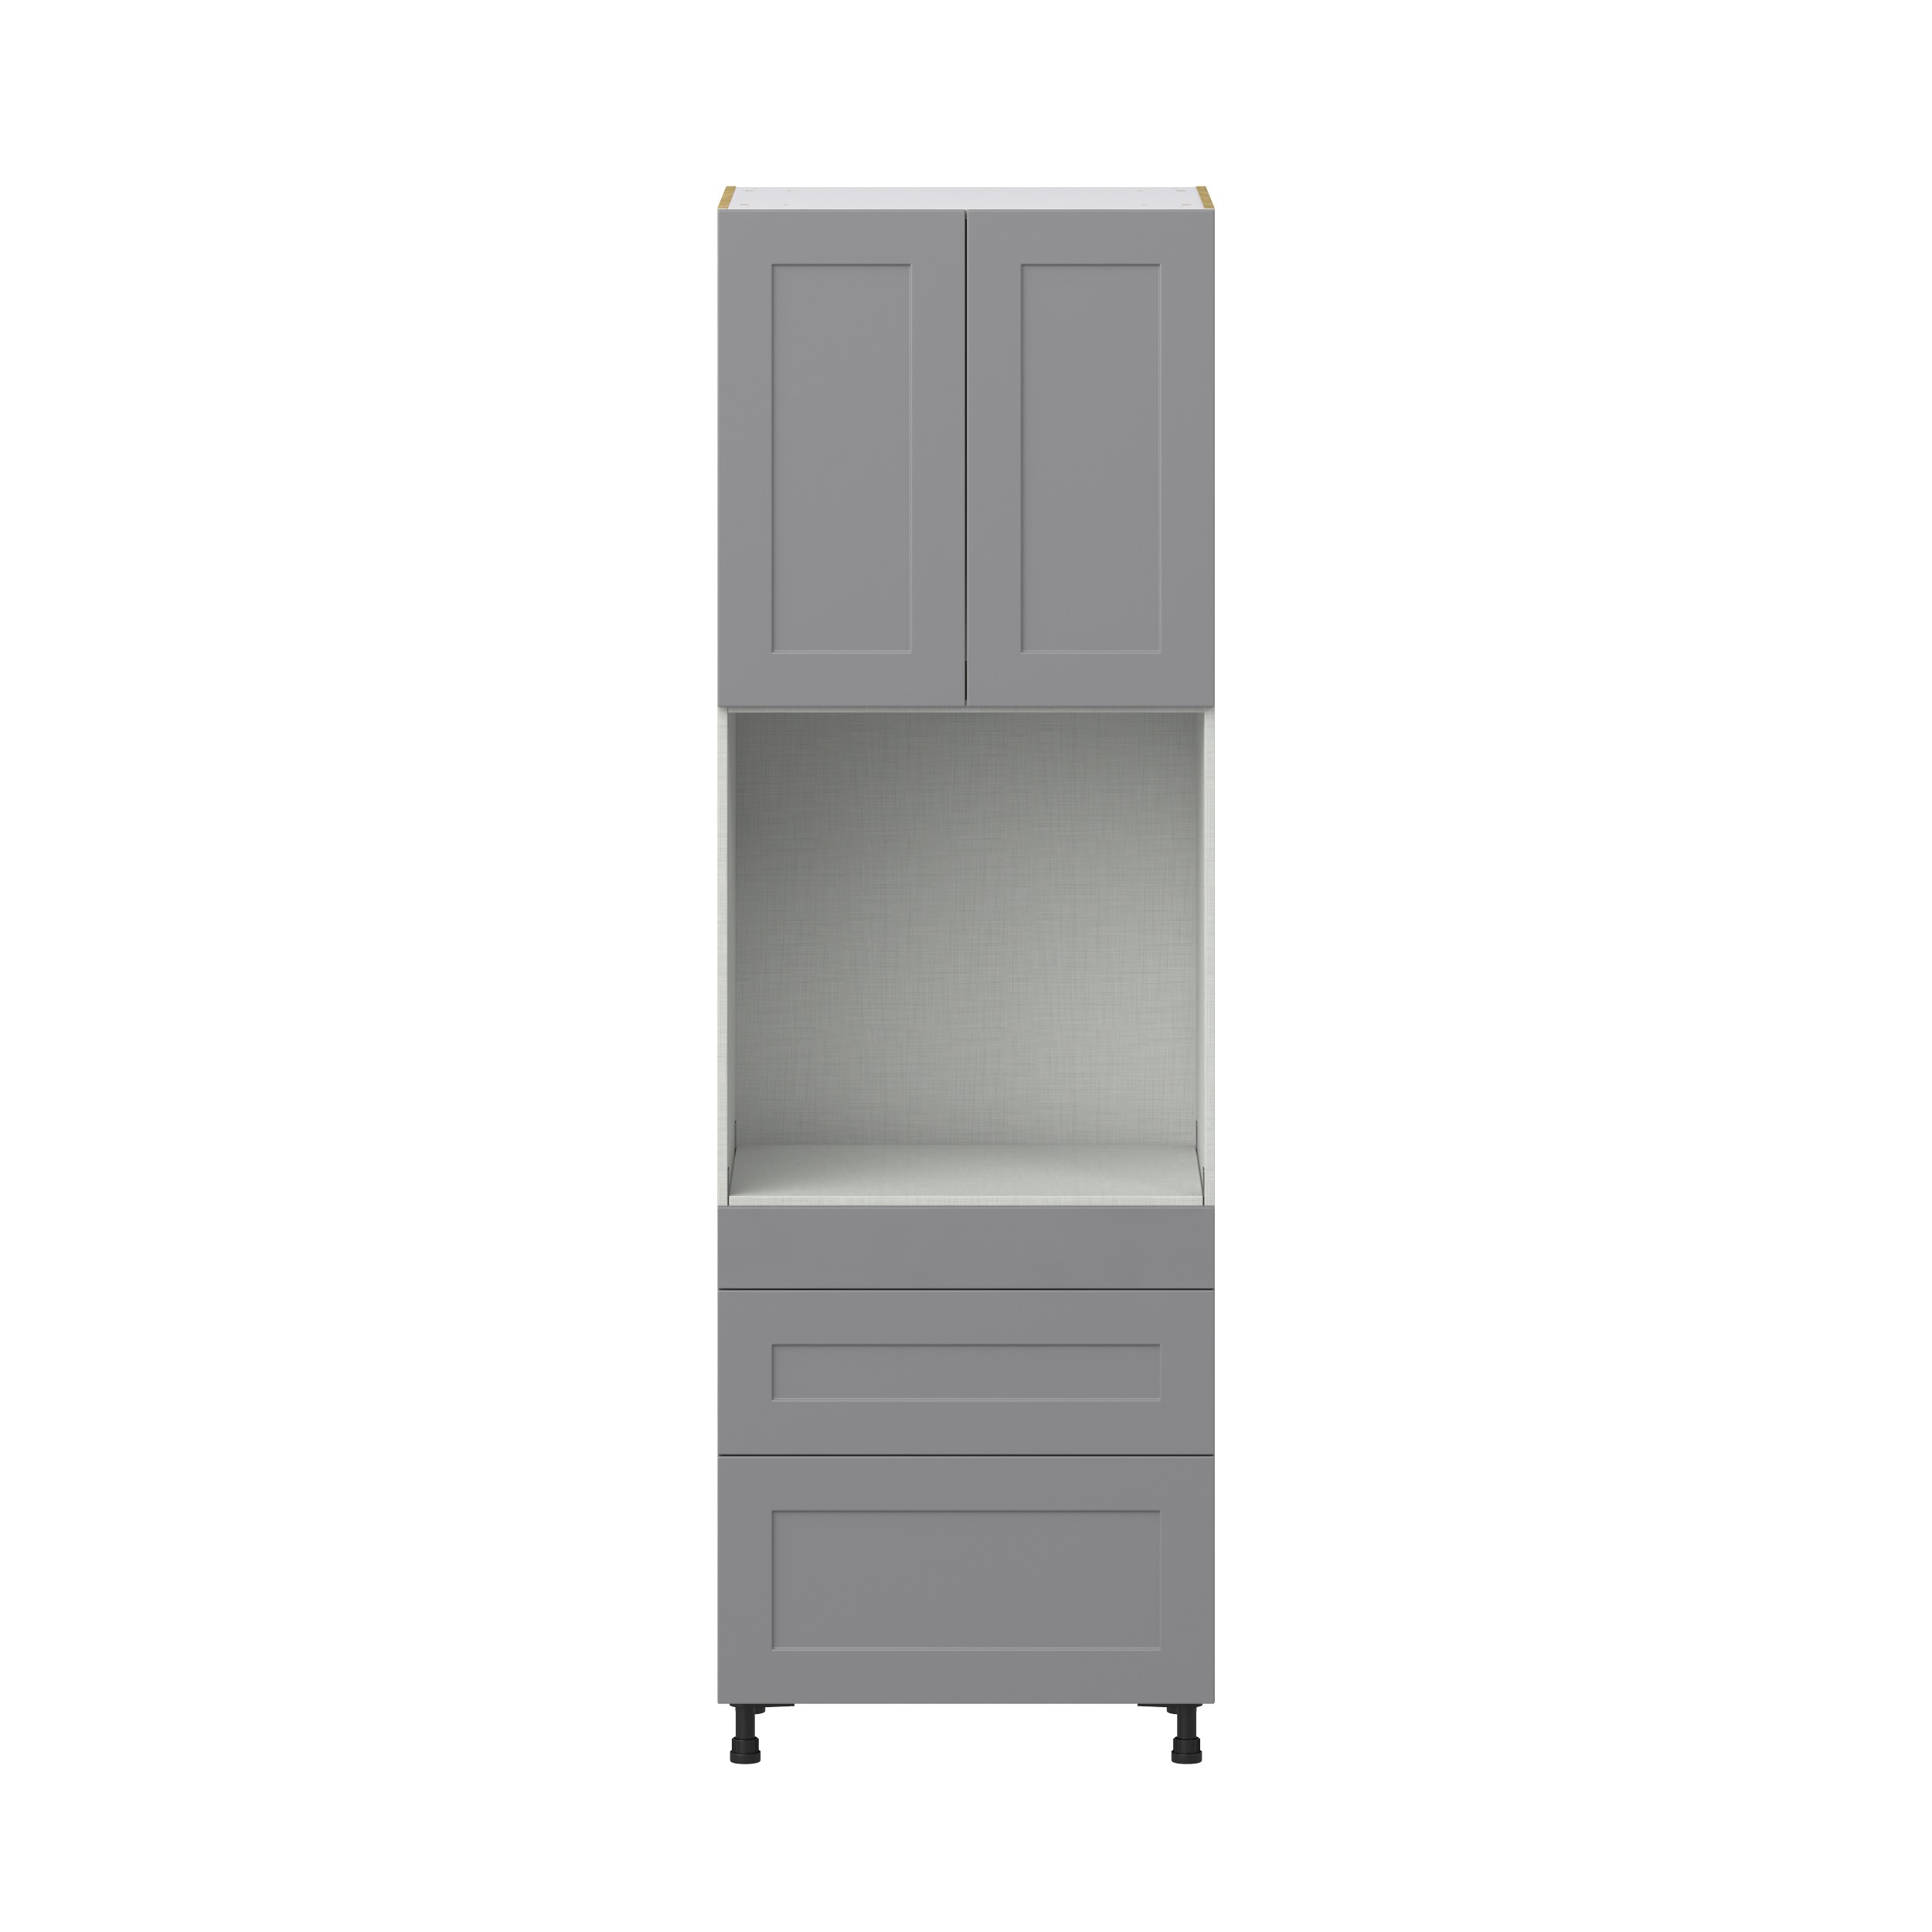 Willow Painted Slate Gray Shaker Assembled Single Oven Cabinet with Drawers (30 in. W x 94.5 in. H x 24 in. D)